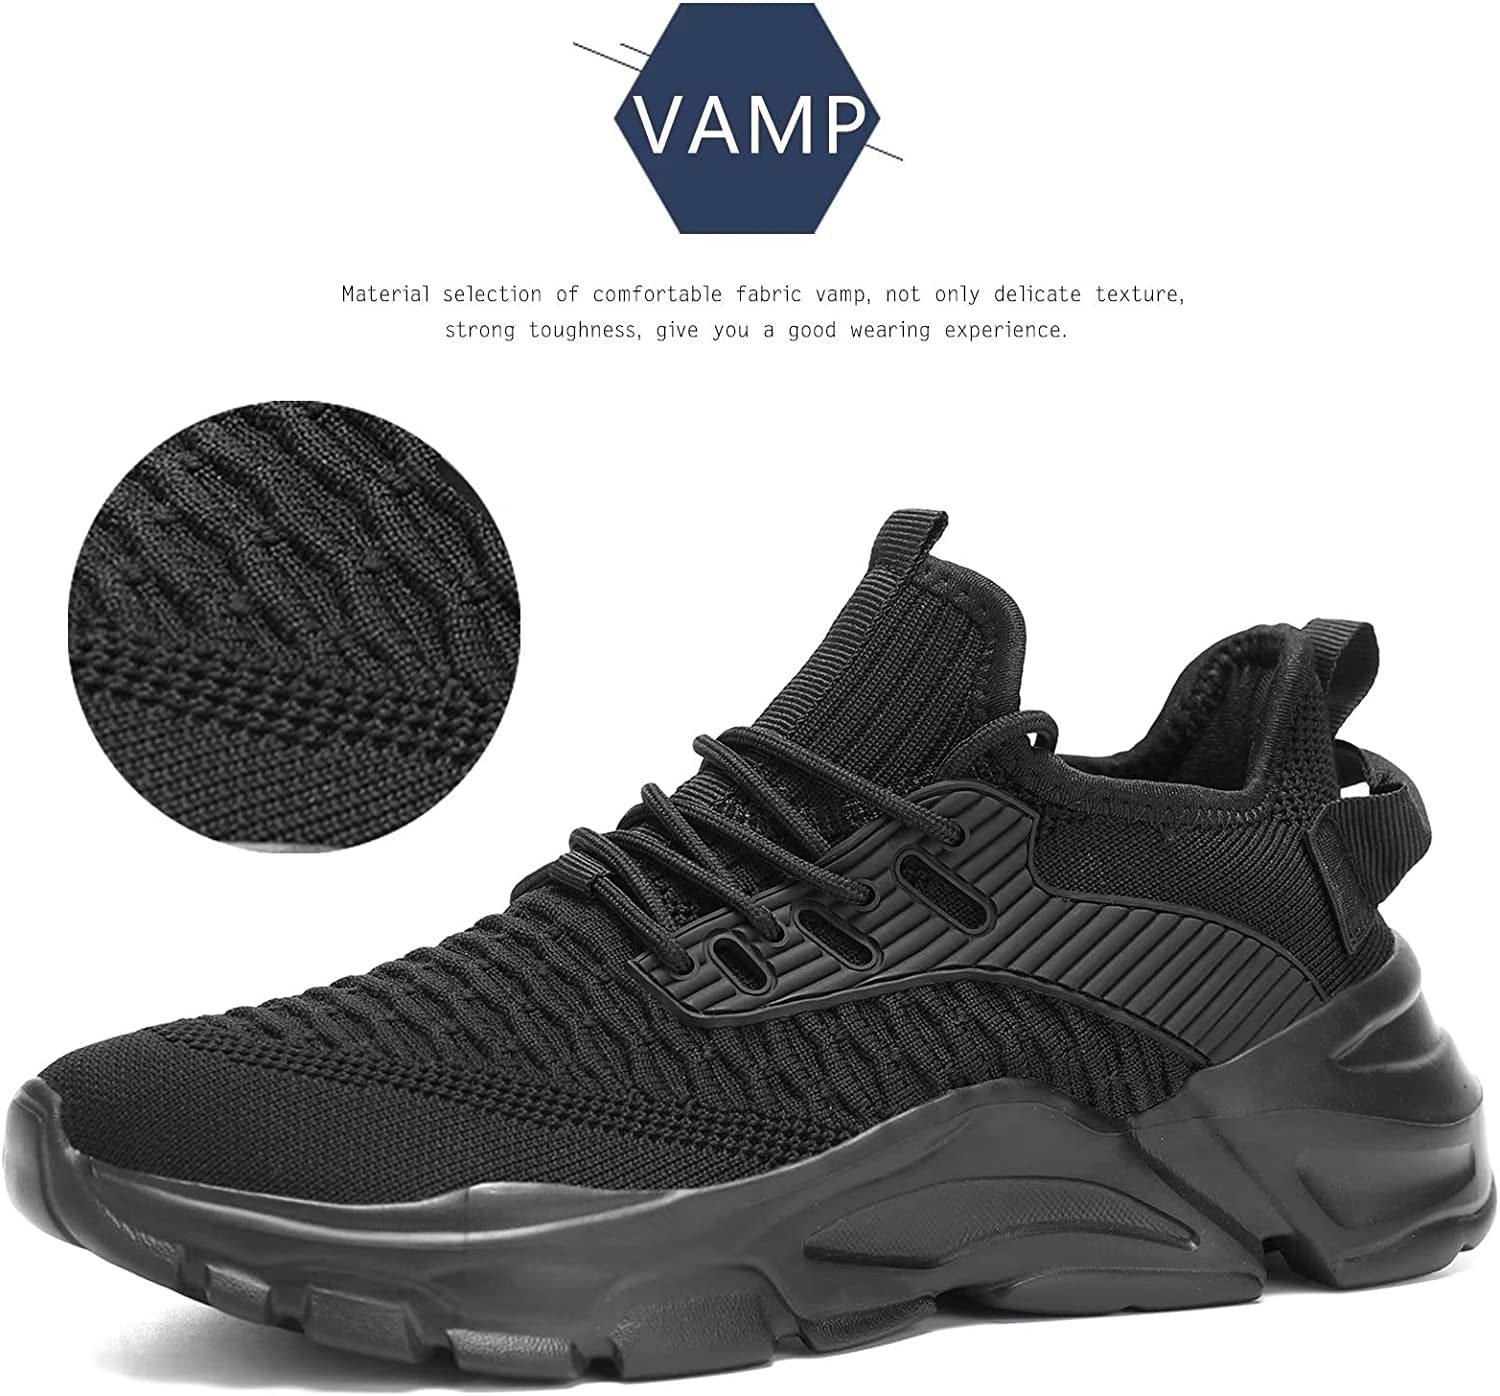 Men's Running Shoes Non Slip Shoes Breathable Lightweight Fashion Sneakers Slip Resistant Athletic Sports Walking Gym Work Shoes